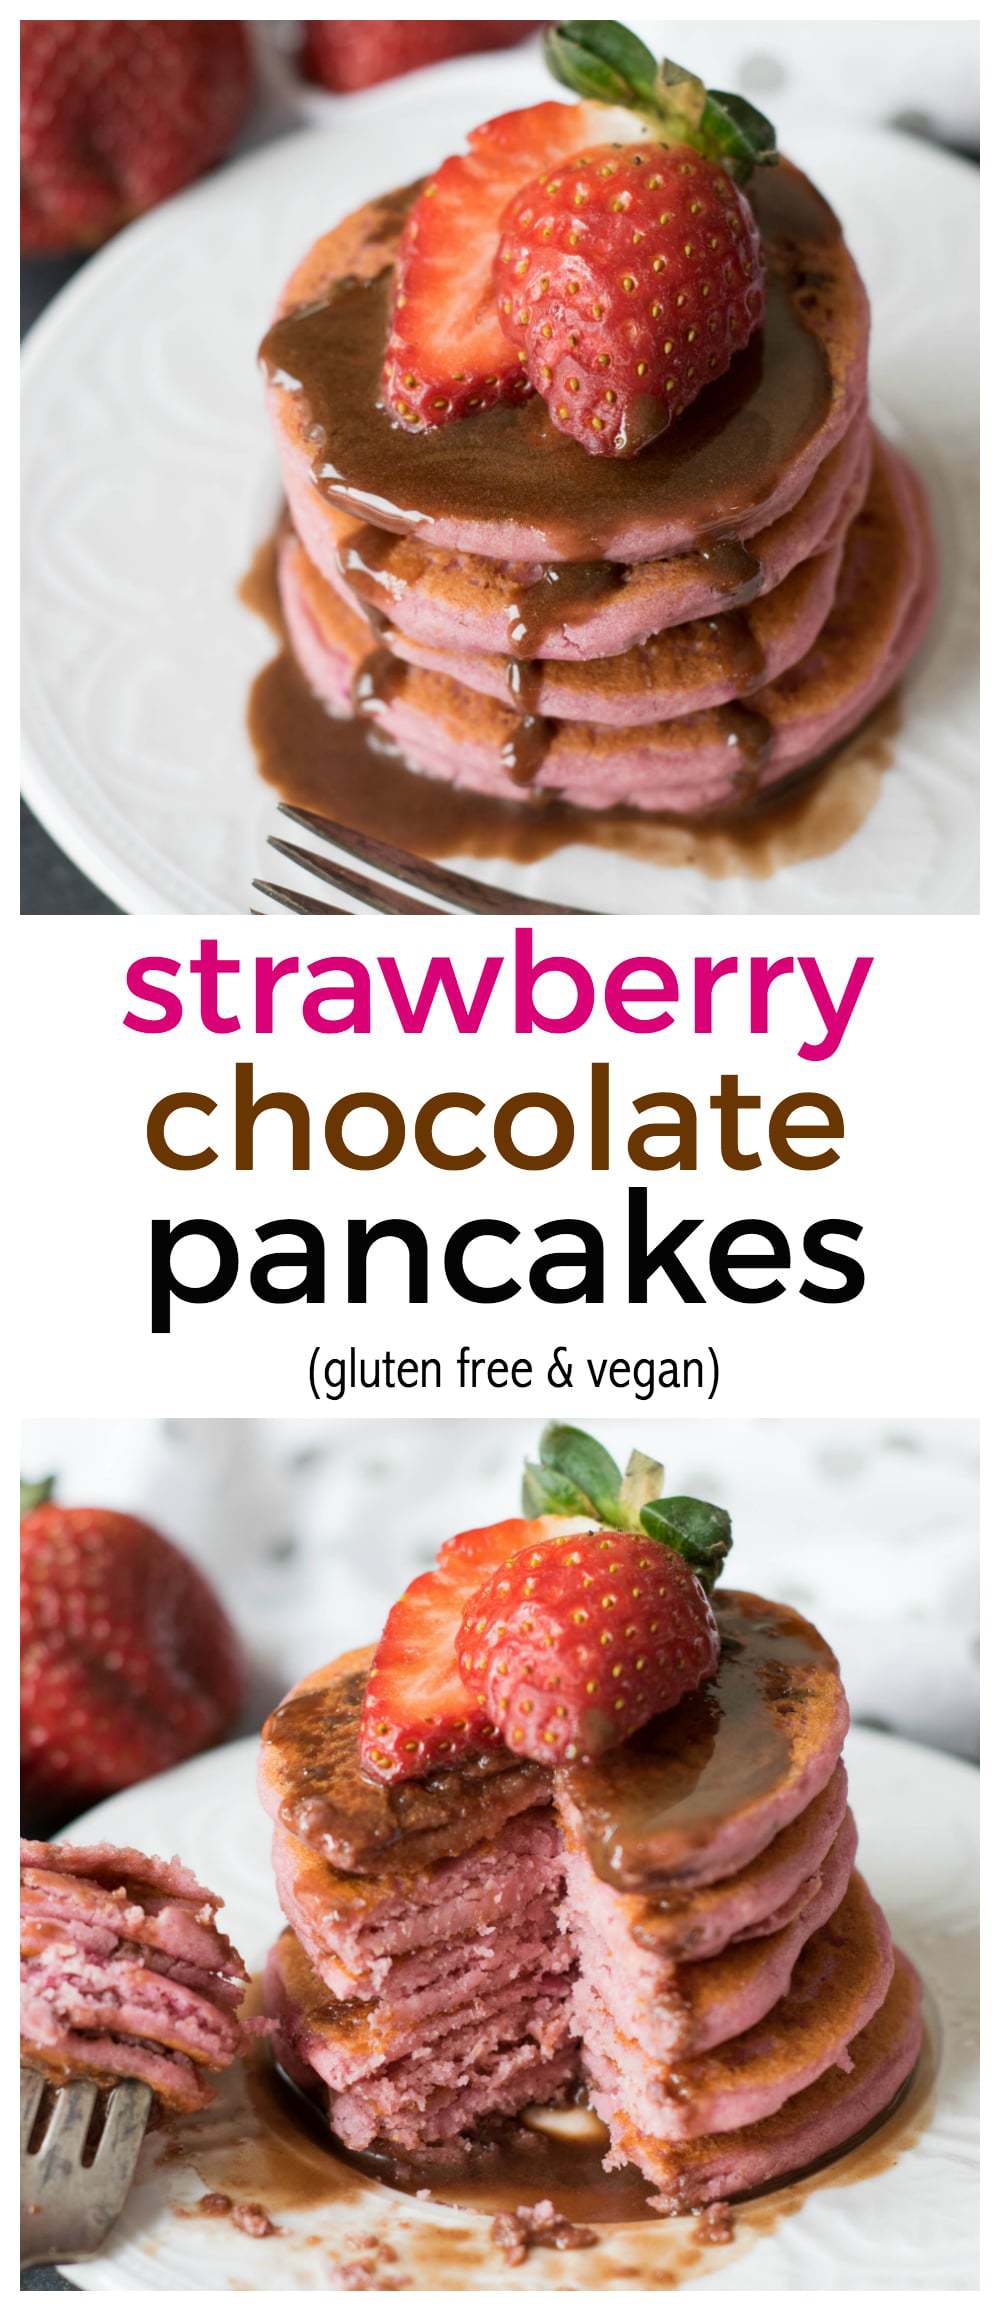 Strawberry Chocolate Pancakes naturally colored - no fake red dyes! (#GlutenFree & #Vegan) - @TheFitCookie #foodbloggenius